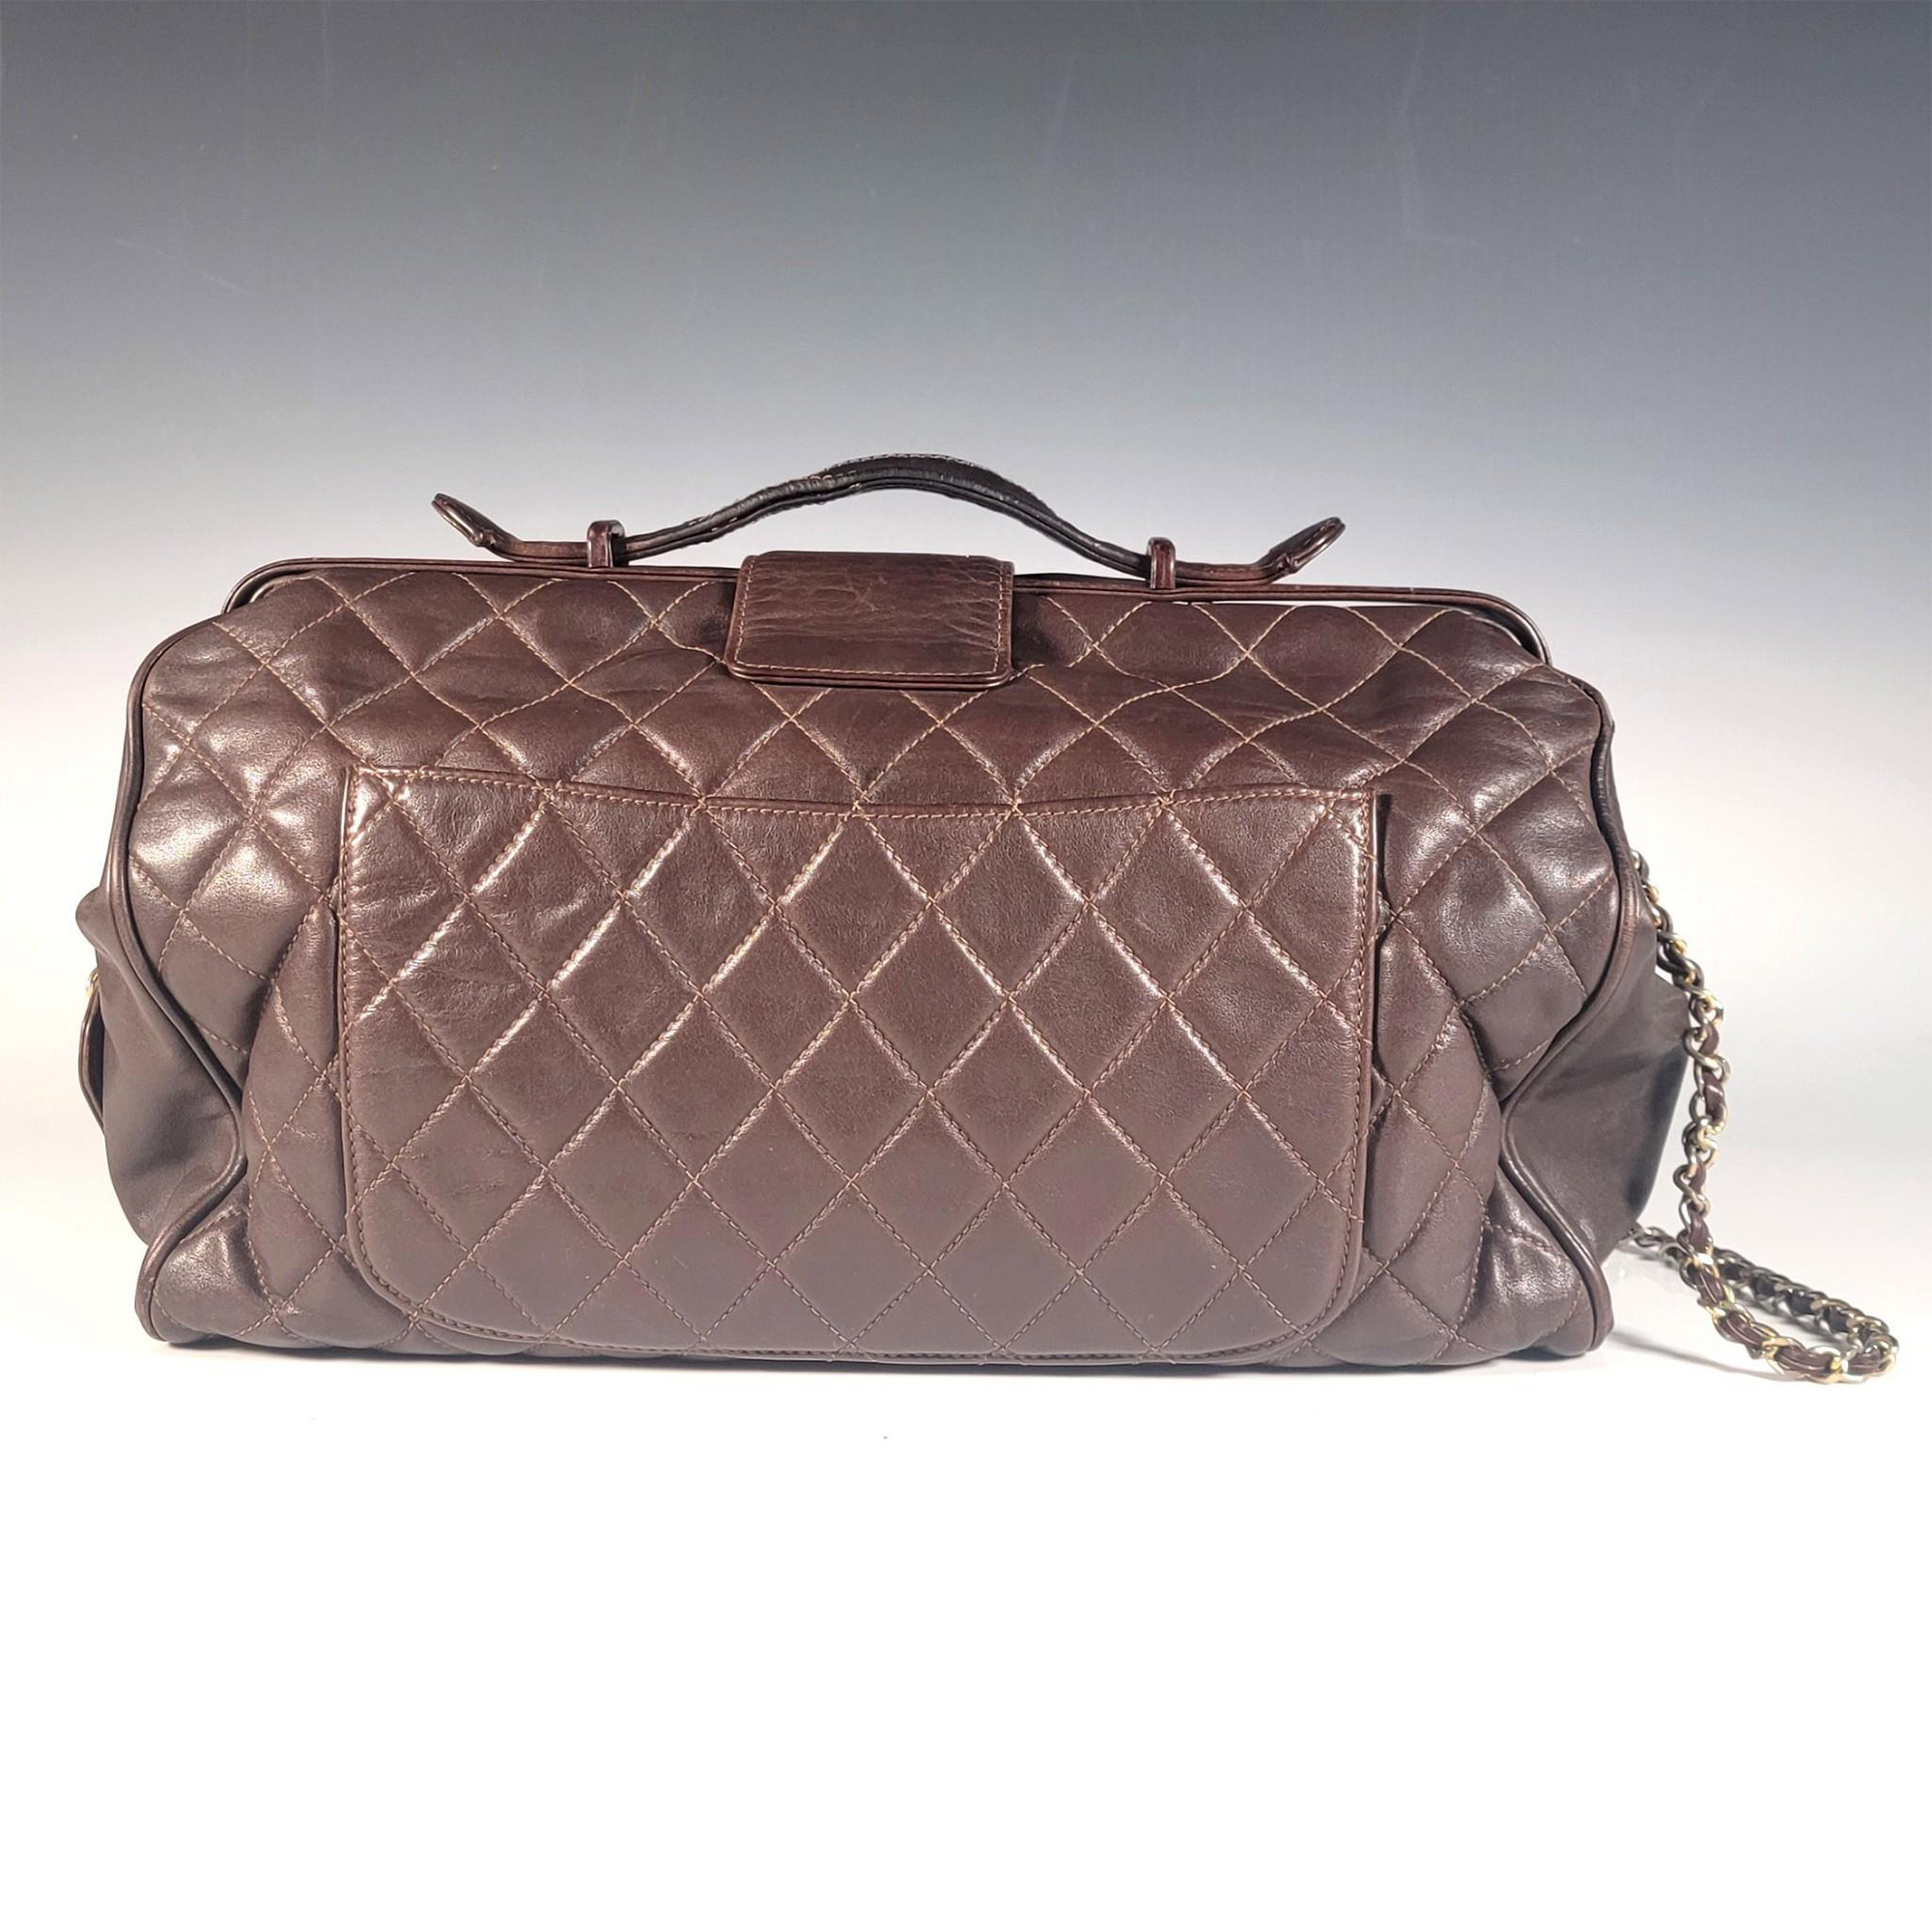 Authentic Chanel Brown Quilted Leather Large Doctor Bag - Image 3 of 13